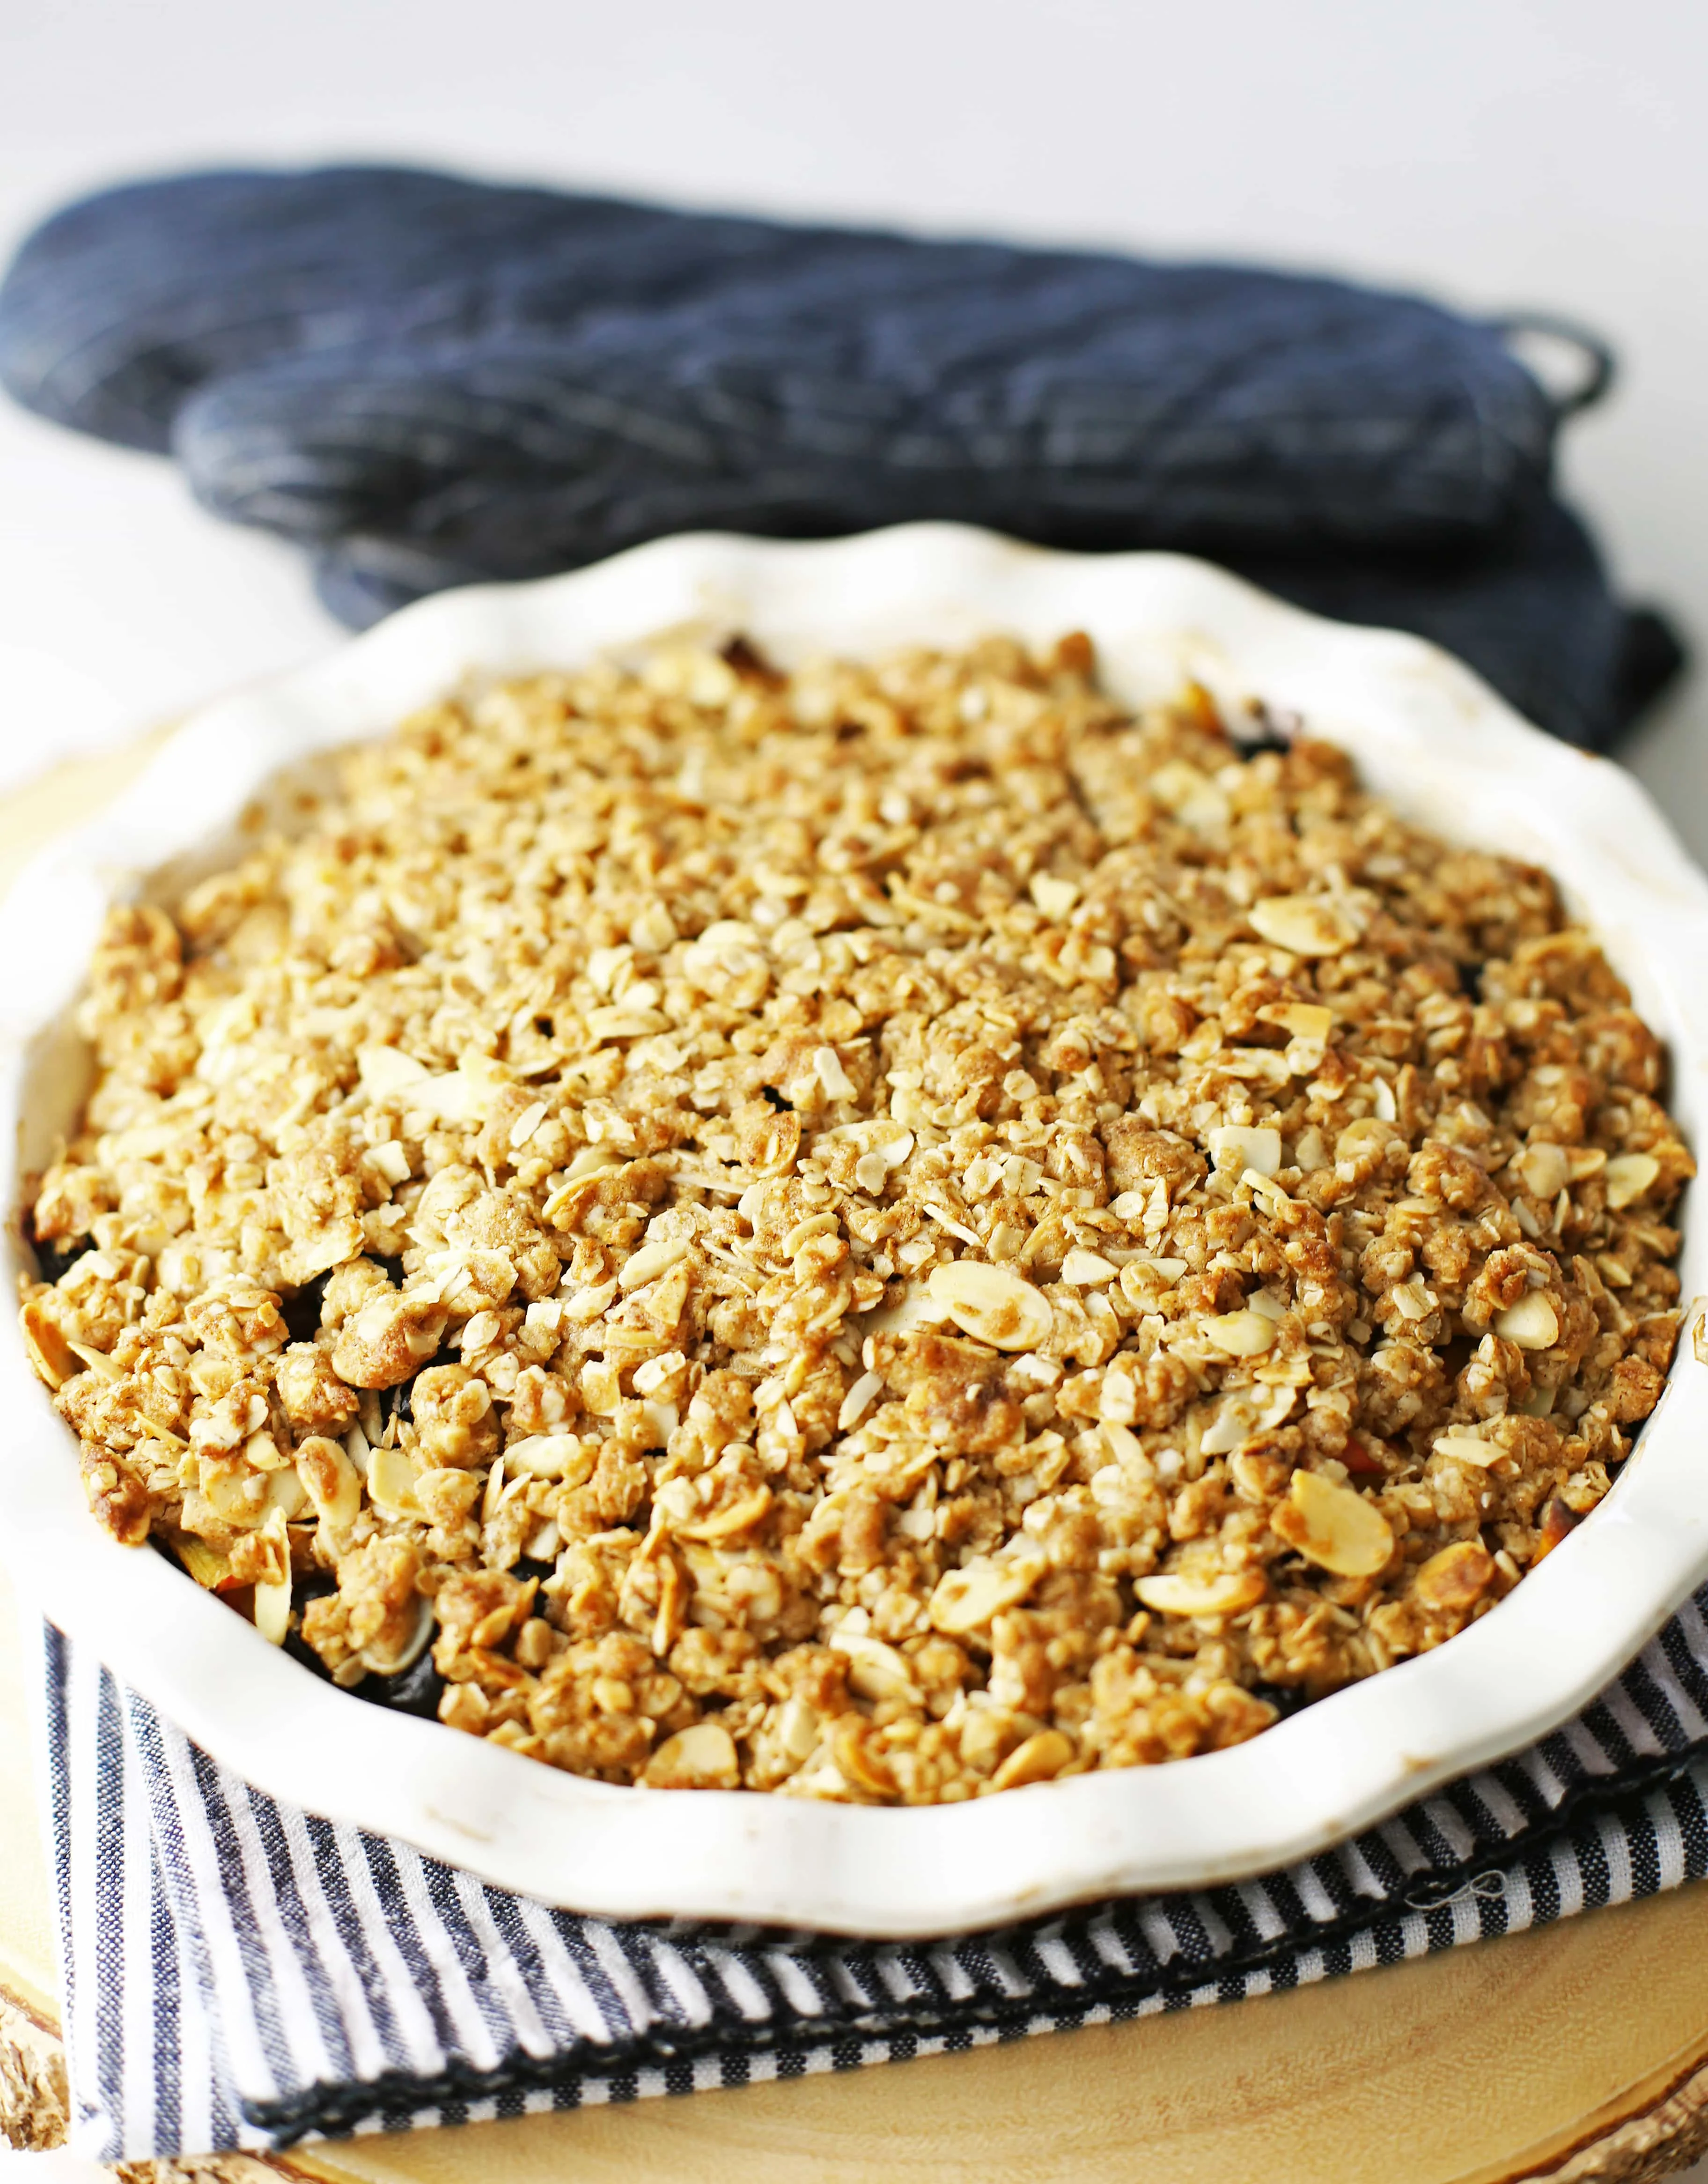 Baked blueberry peach crisp with almond oat topping in a pie dish on top of a white and blue towel.